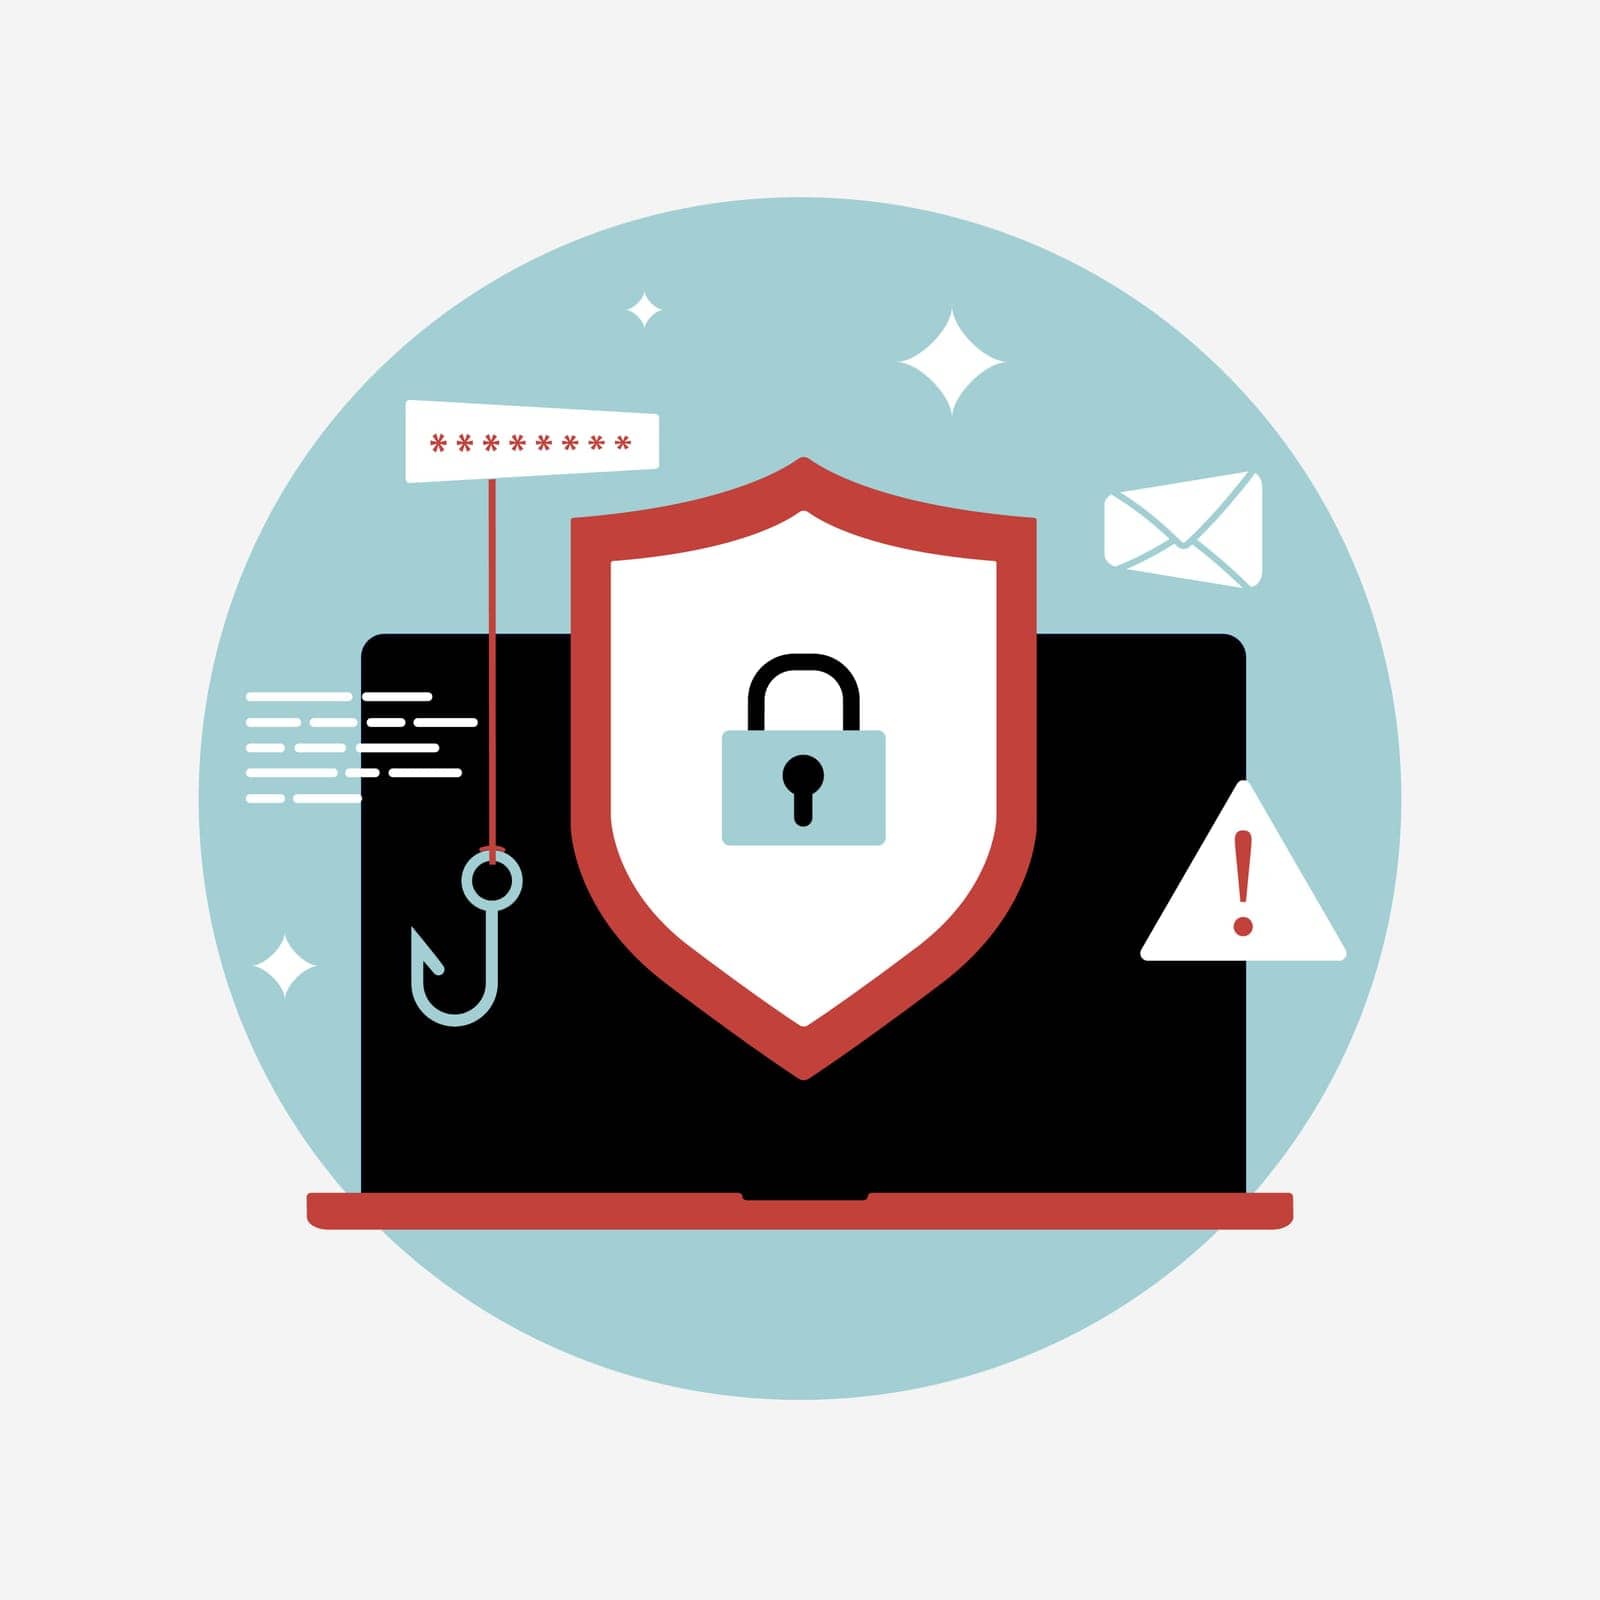 Virus protection, Cybersecurity, Malware defense, Online threat graphics, Internet security, Firewall illustrations, Antivirus software, Computer protection visuals vector icon isolated on white.